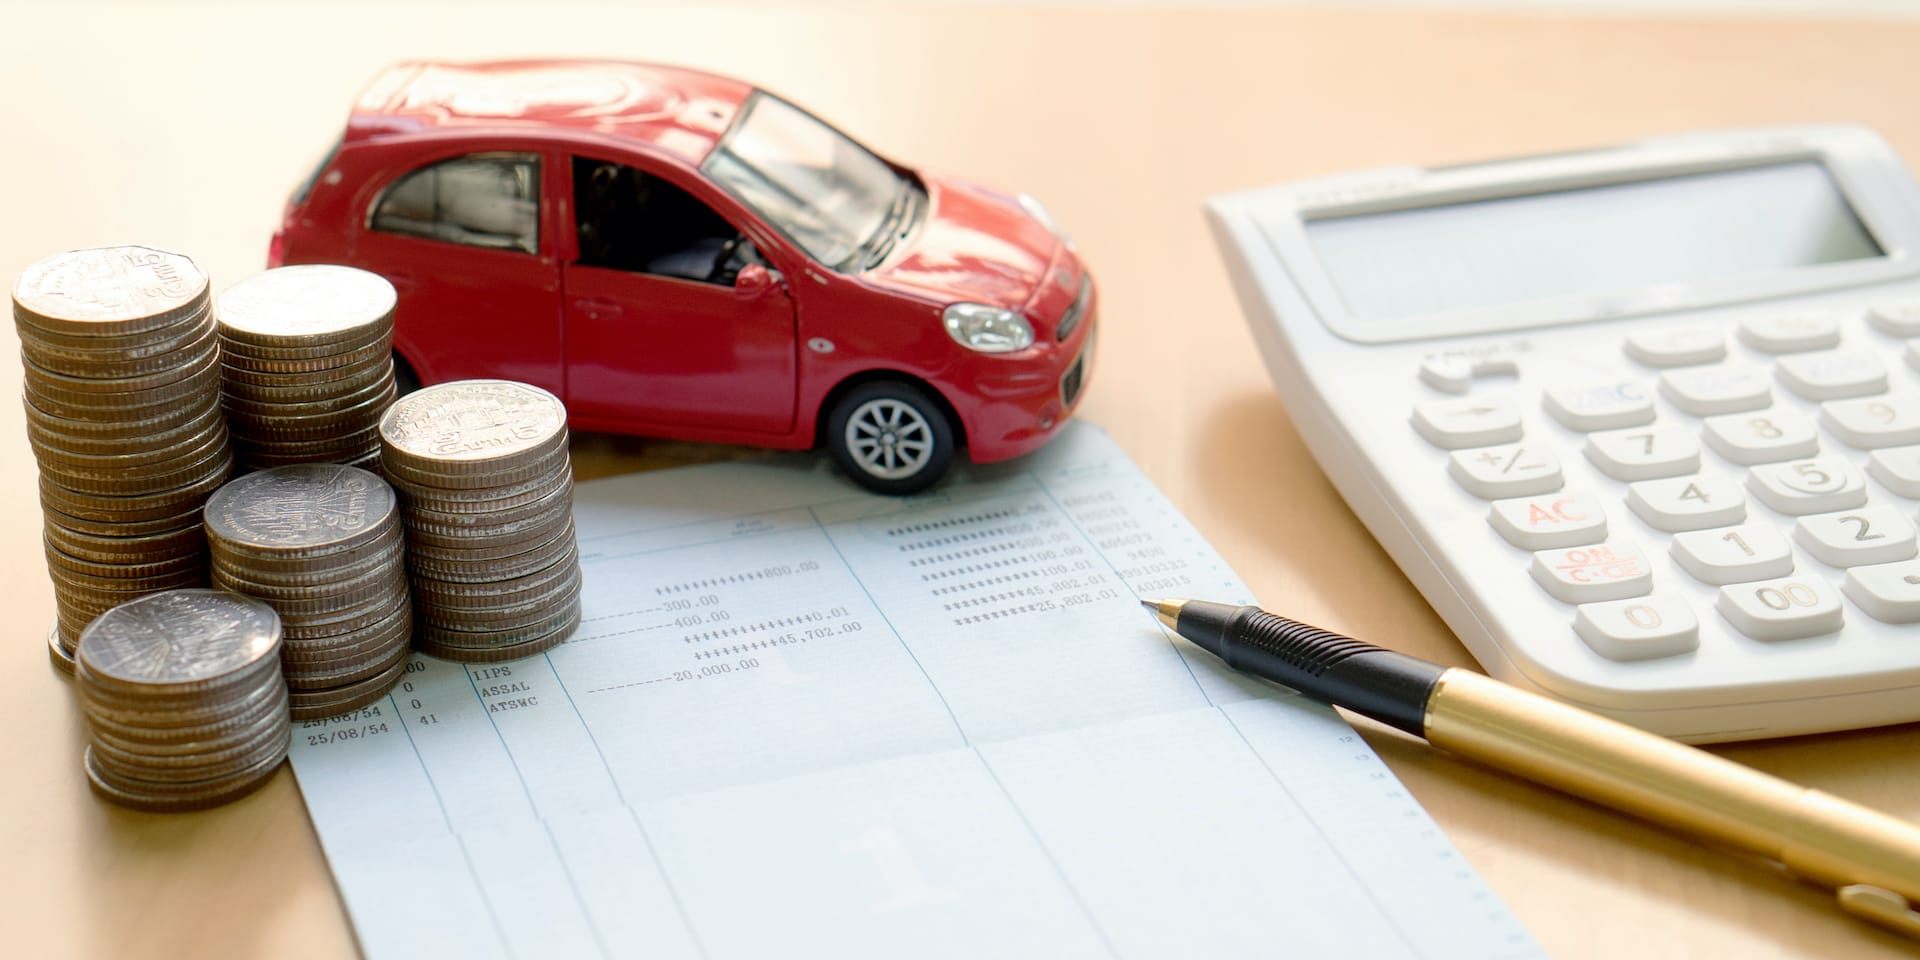 Endless increase in car finance debt threatens household budgets